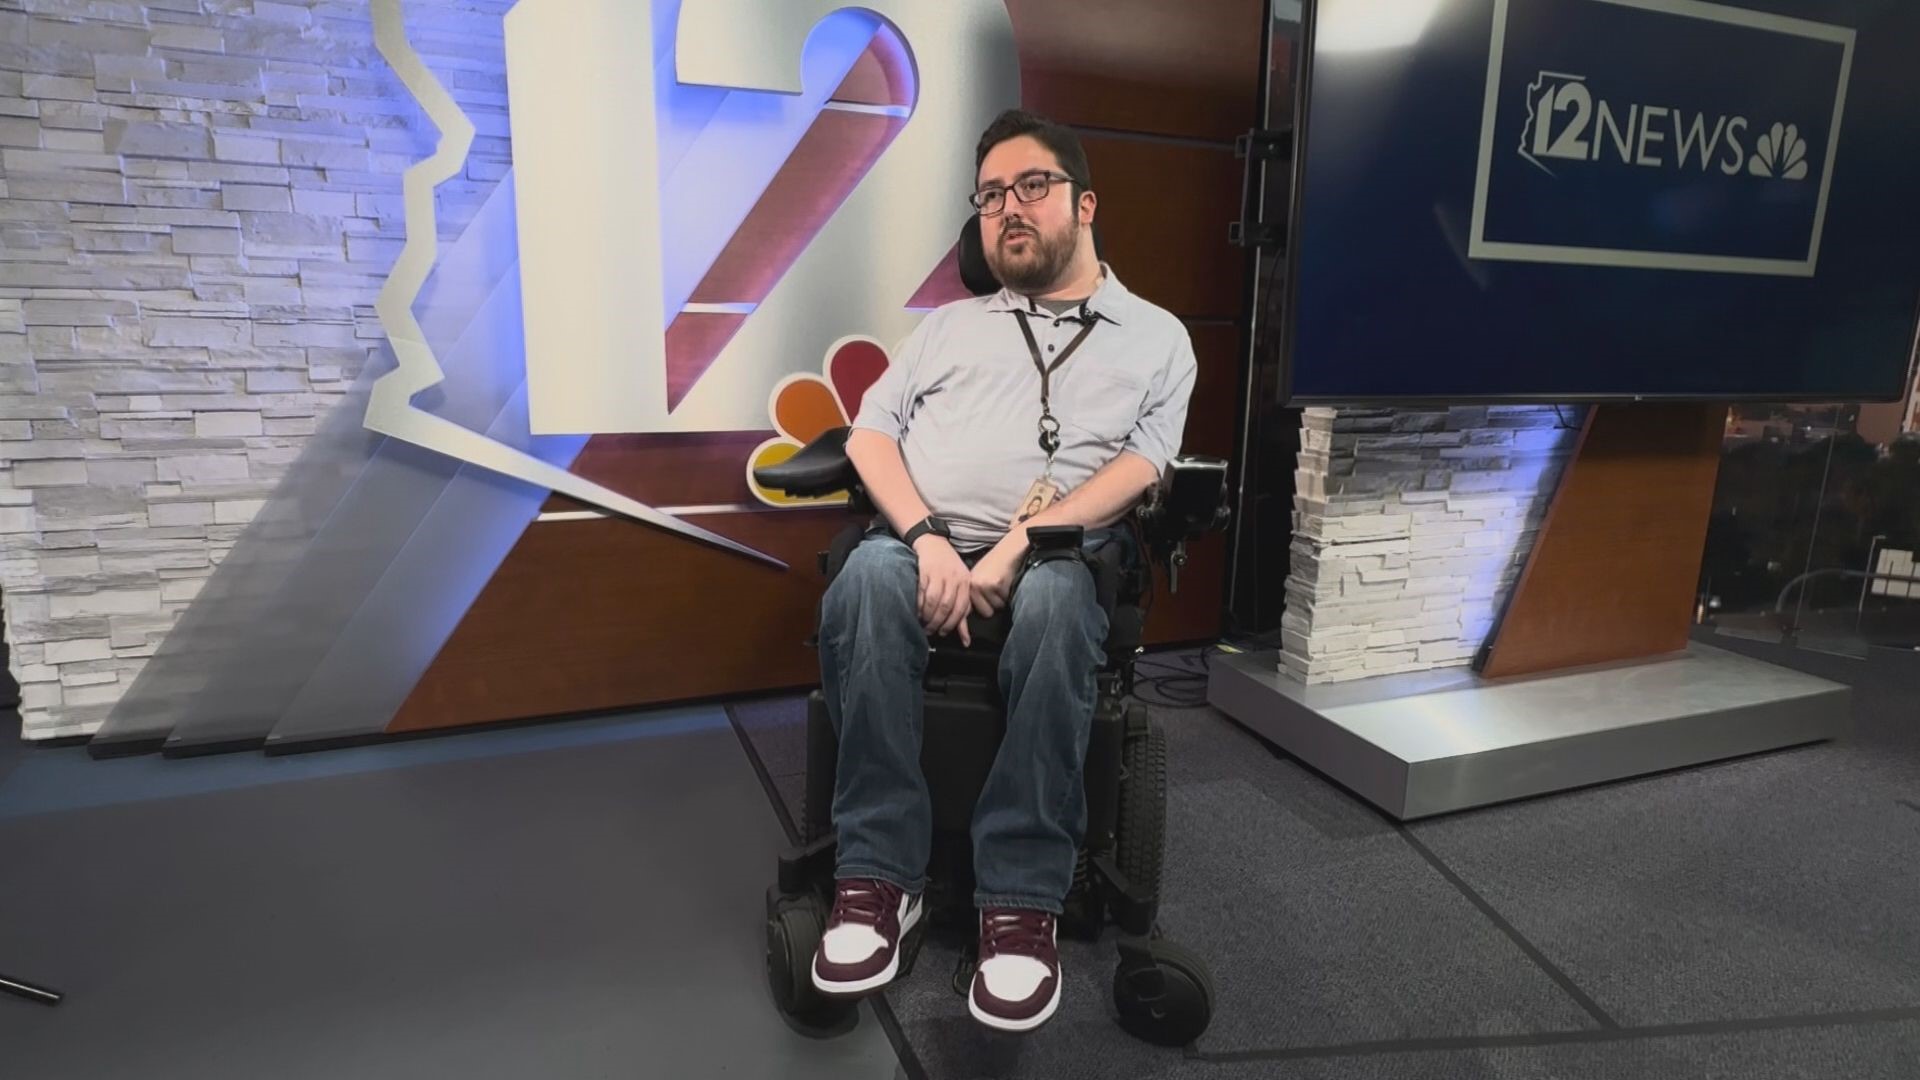 Gabe Trujillo is the Digital Executive Producer at 12News and he talks about what this month means to him as a wheelchair user and disabled person.